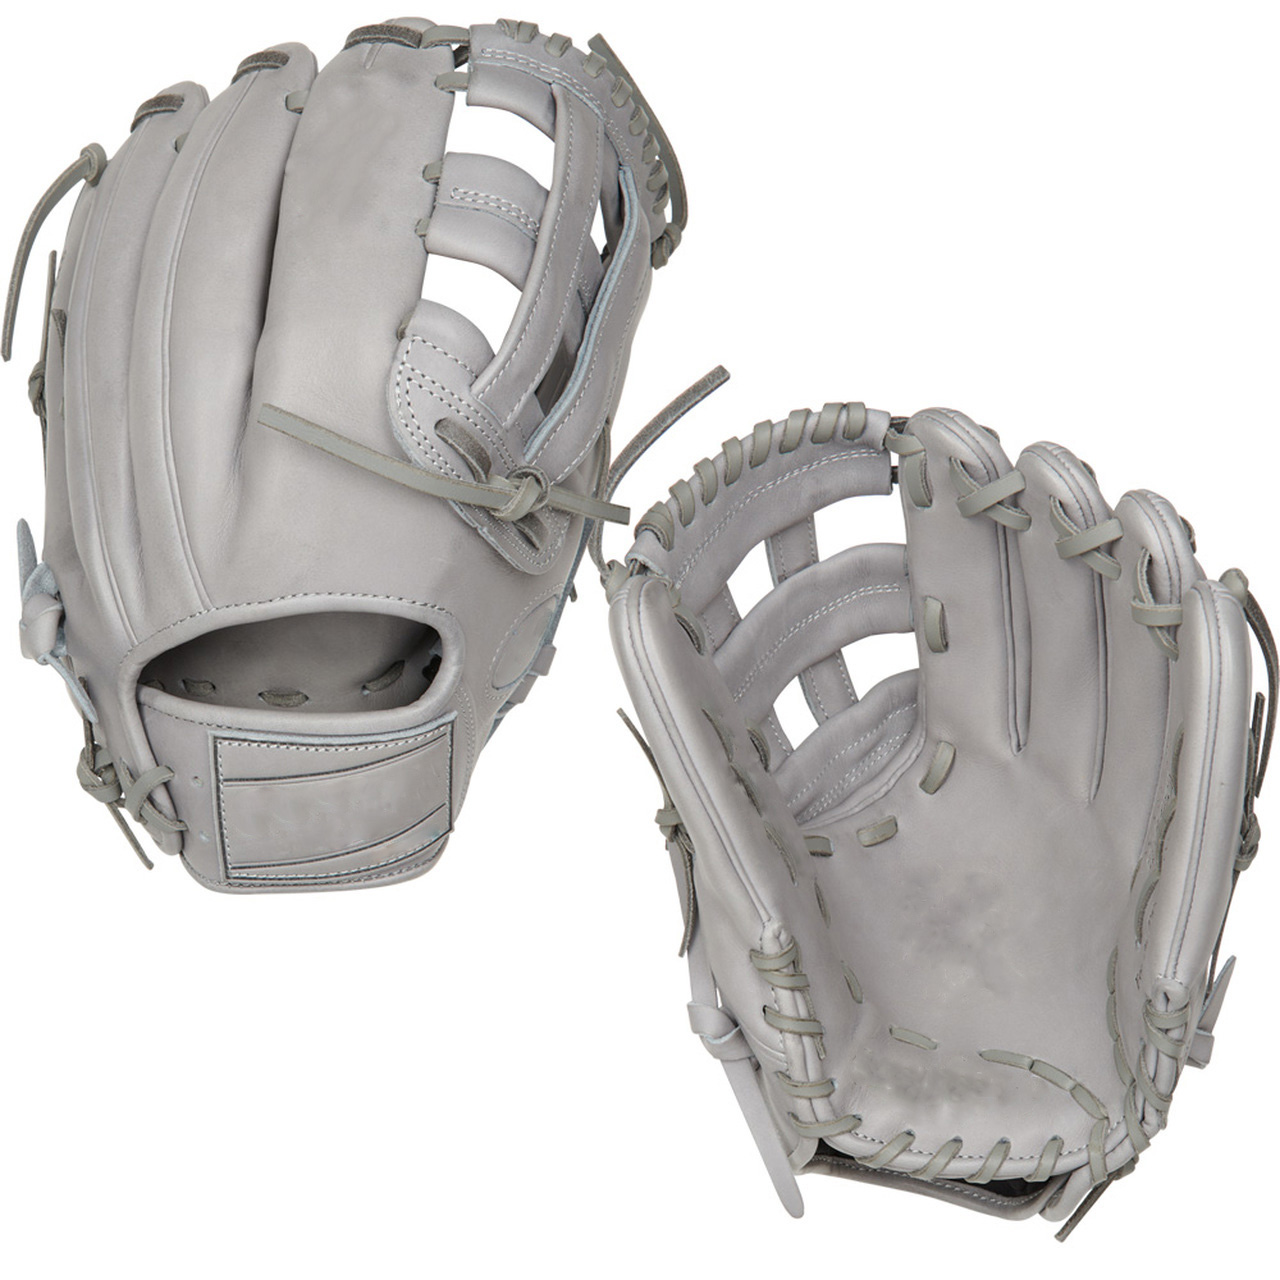 cowskin leather full leather H web 11.5'' right hand throw baseball gloves